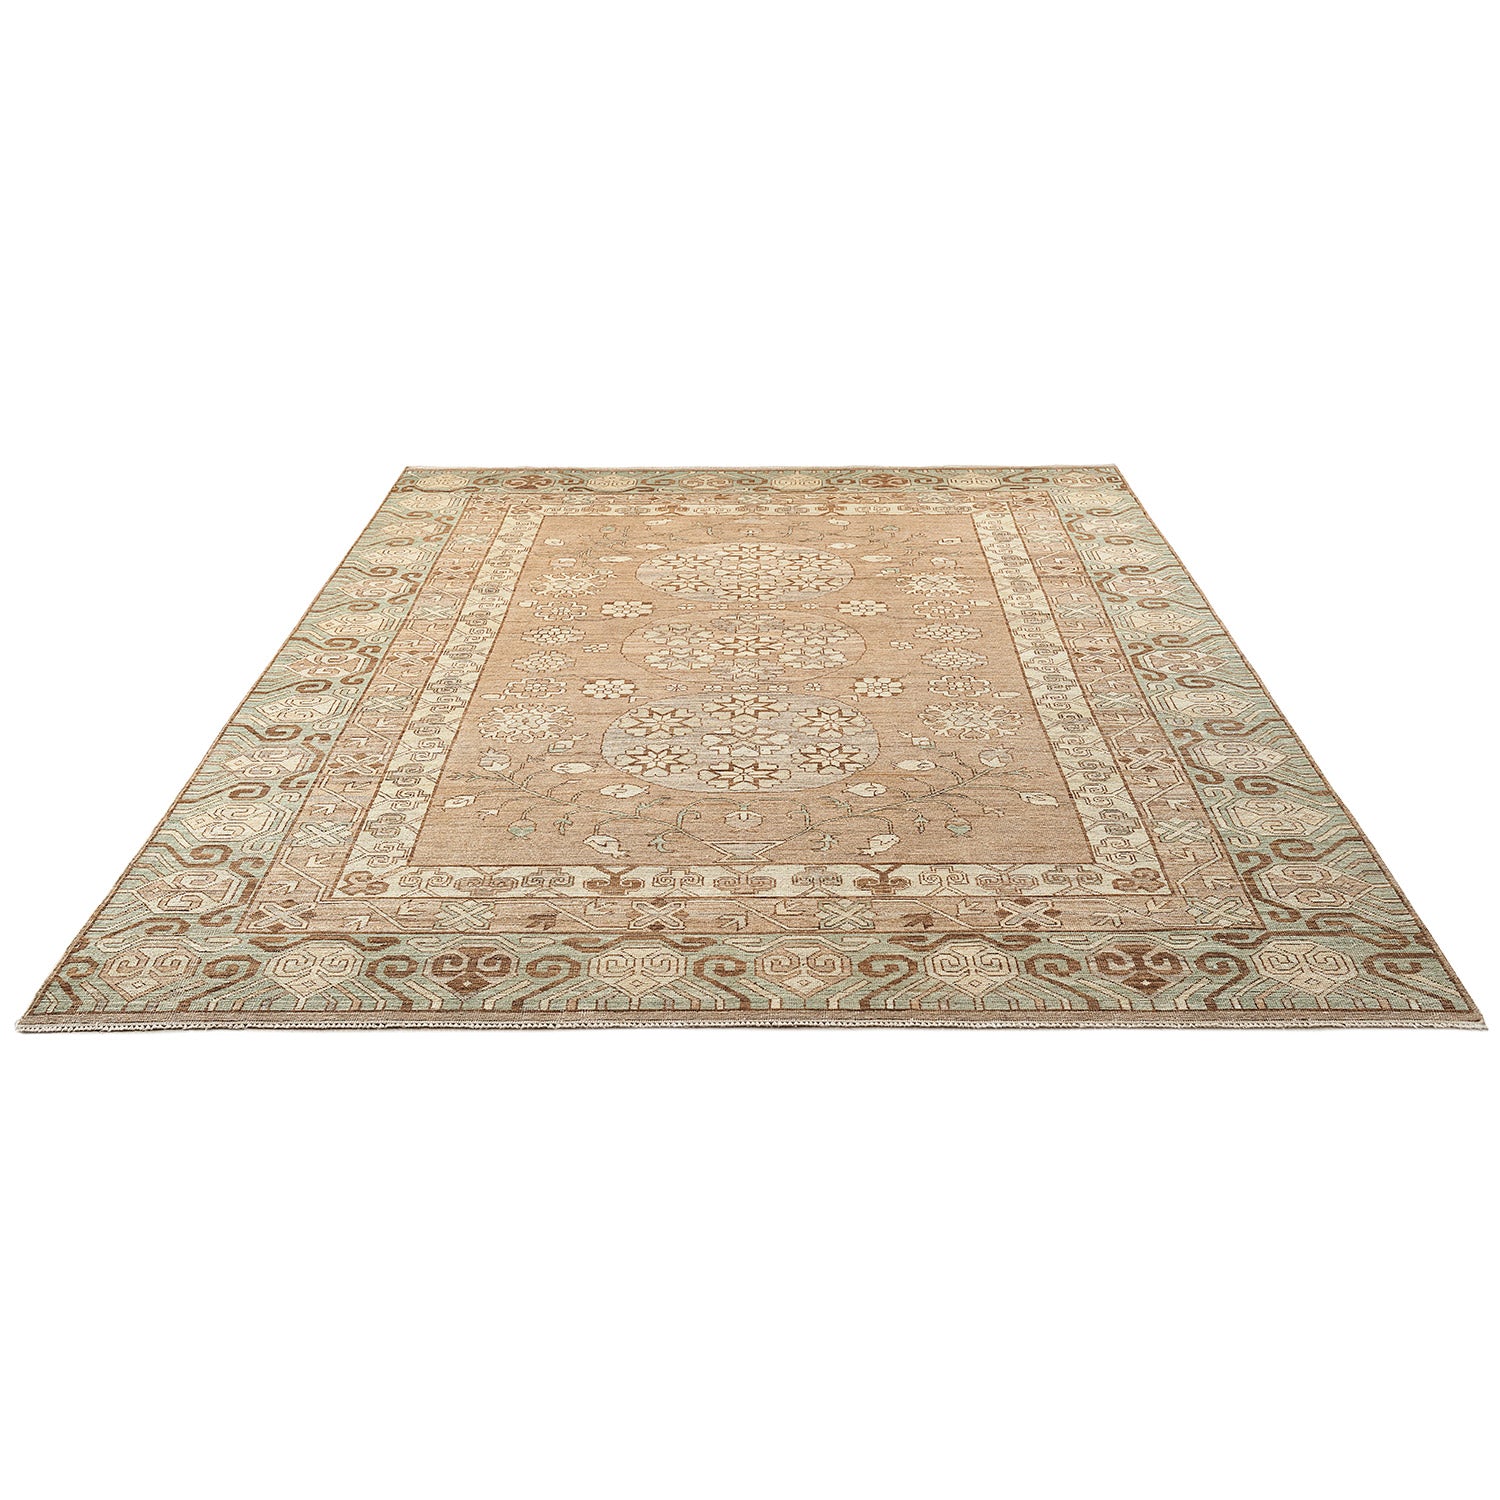 Exquisite Persian-style rug with intricate floral motifs in muted tones.